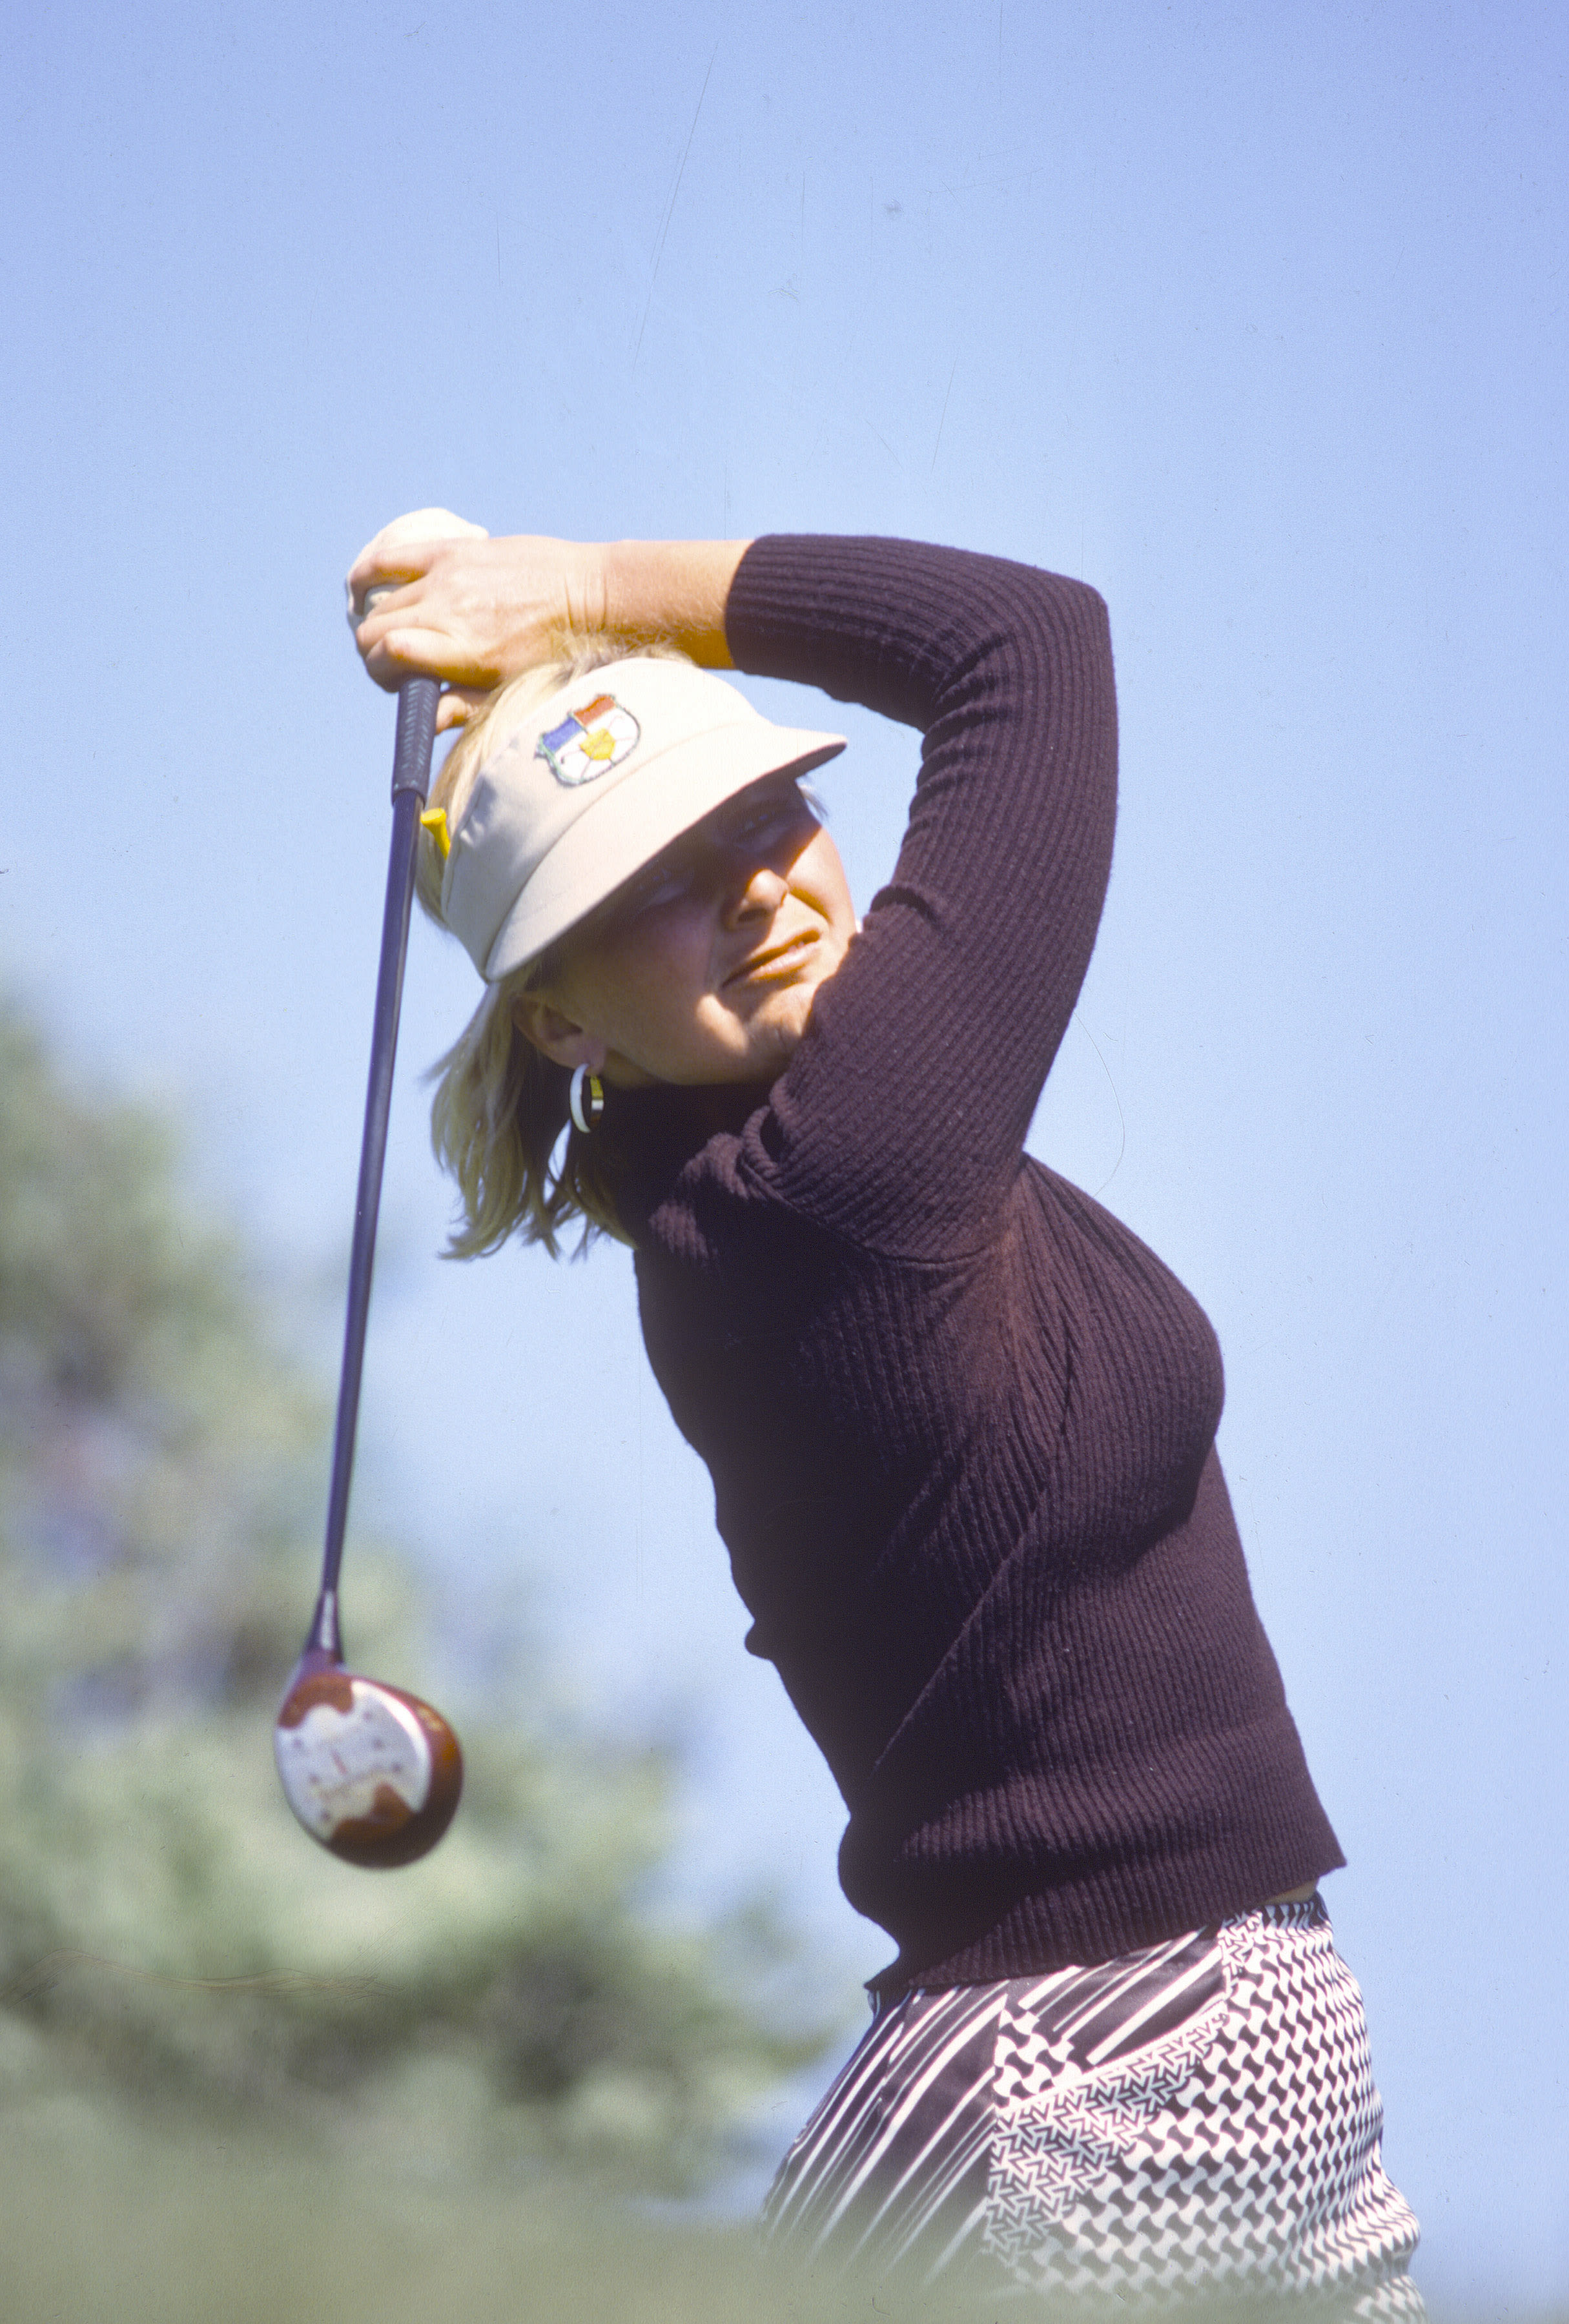 Post has become a legendary Canadian athlete after her career on the LPGA Tour. (Focus on Sport/Getty Images)